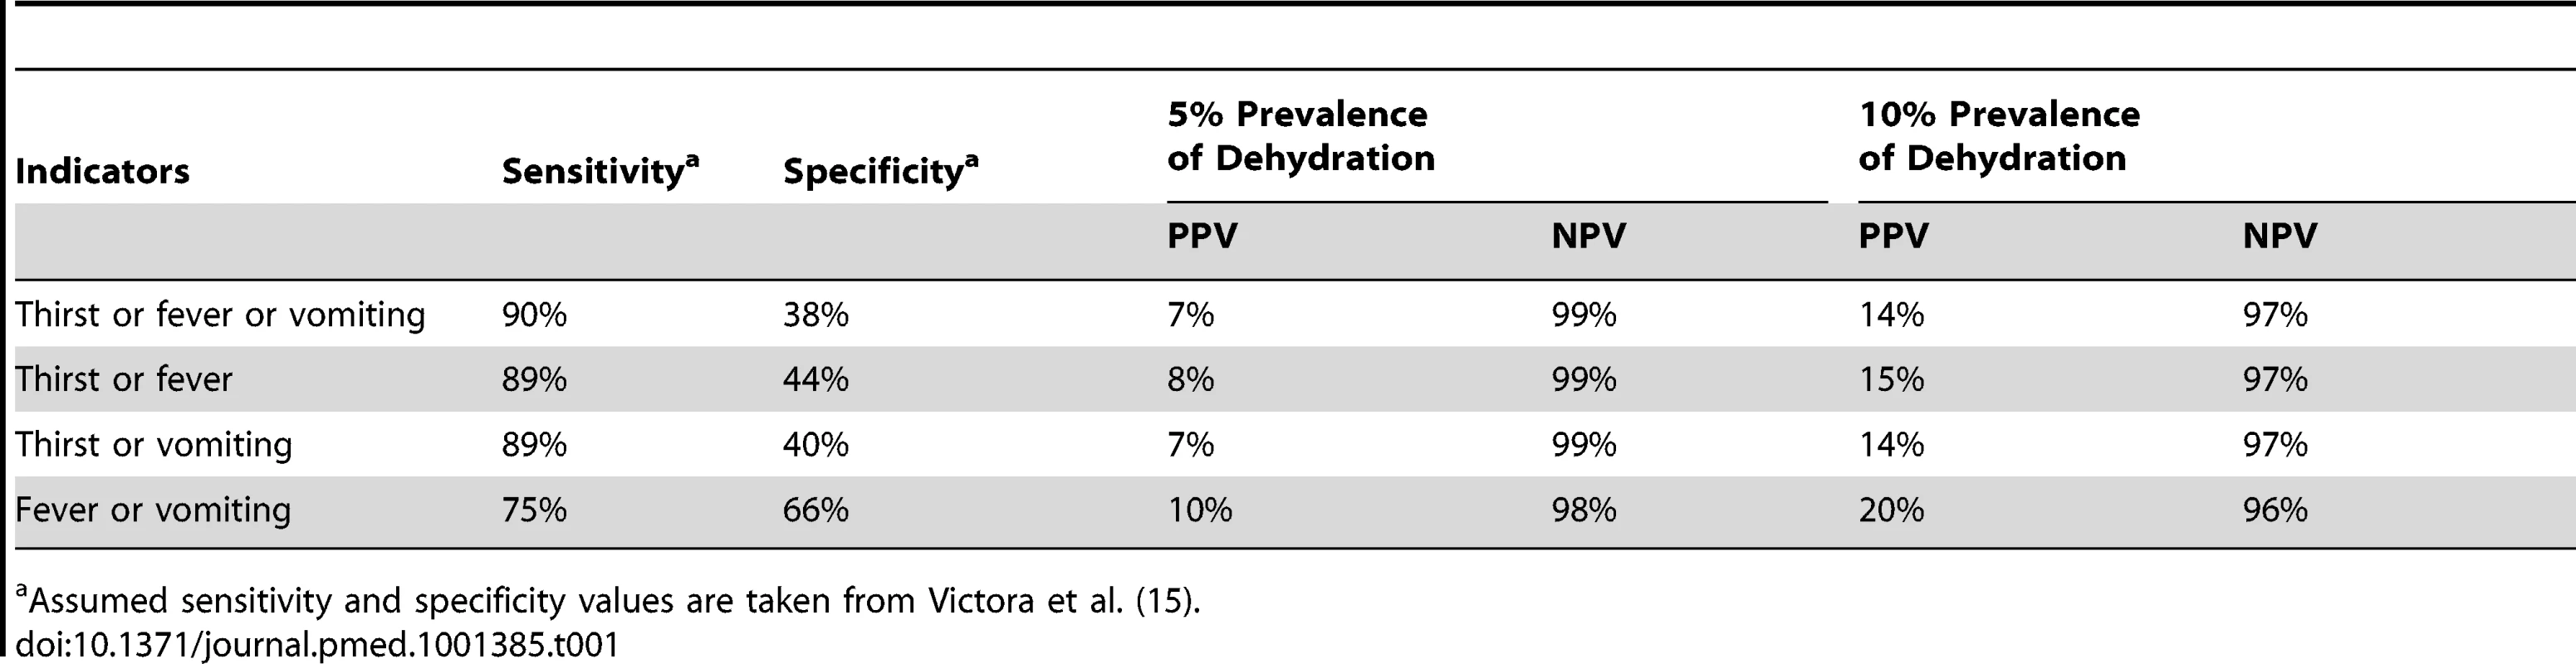 Range of diagnostic values for dehydration from diarrhea based on selected severity indicators.